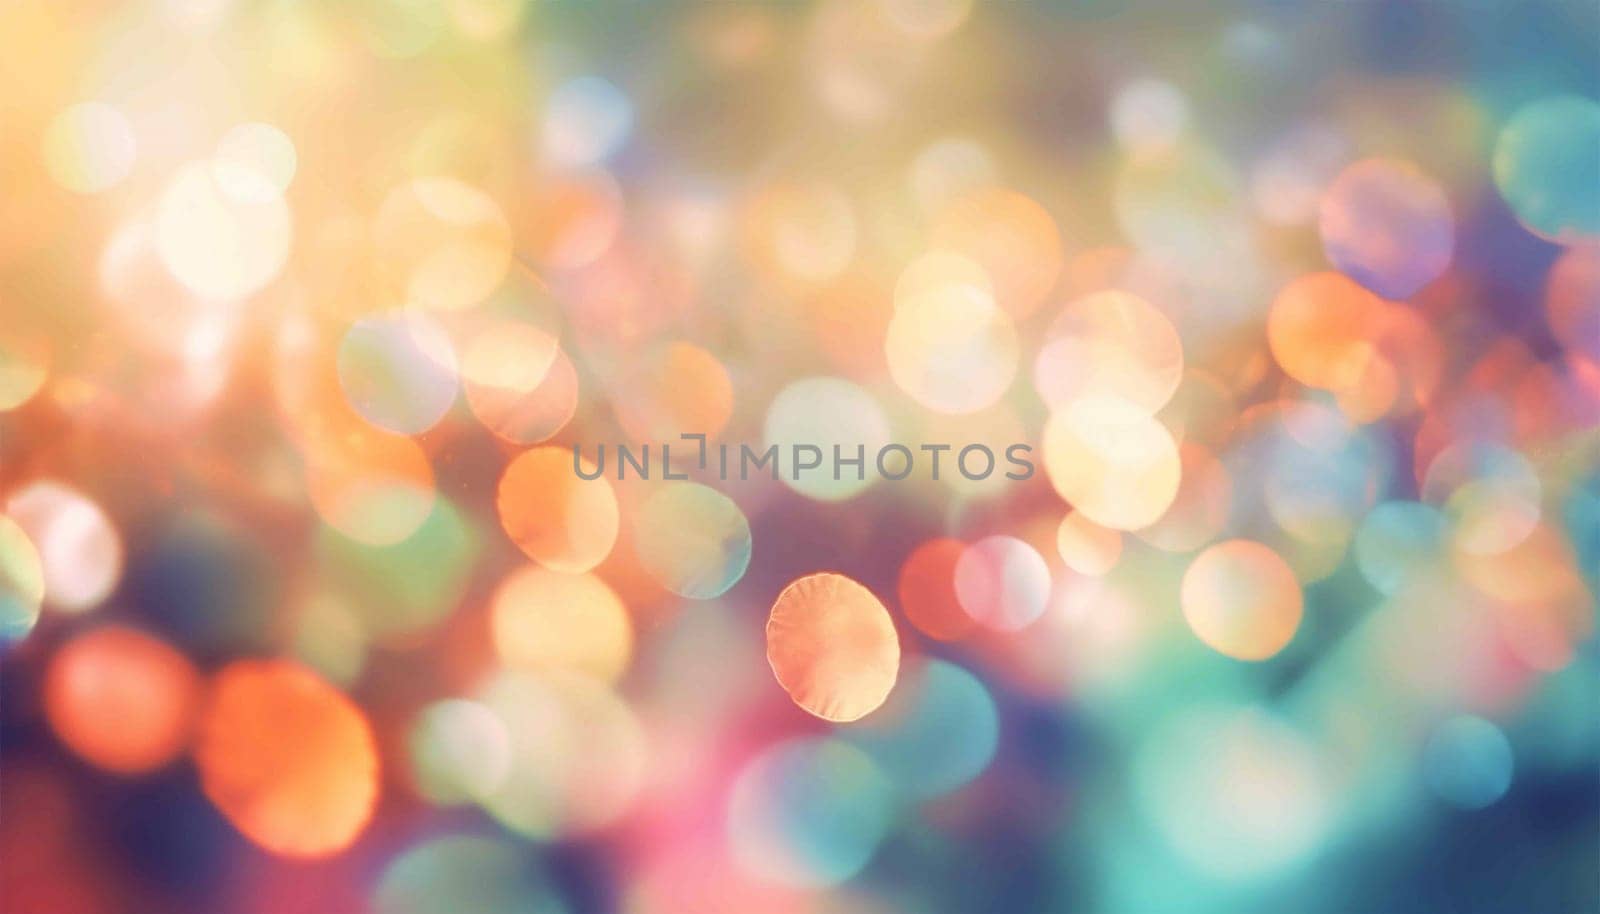 Defocused abstract bokeh background pastel colored, flare from lights, blurred round bokeh as holiday fon, celebration wallpaper. Glittering aesthetic textured pattern Purple,pink neon lights